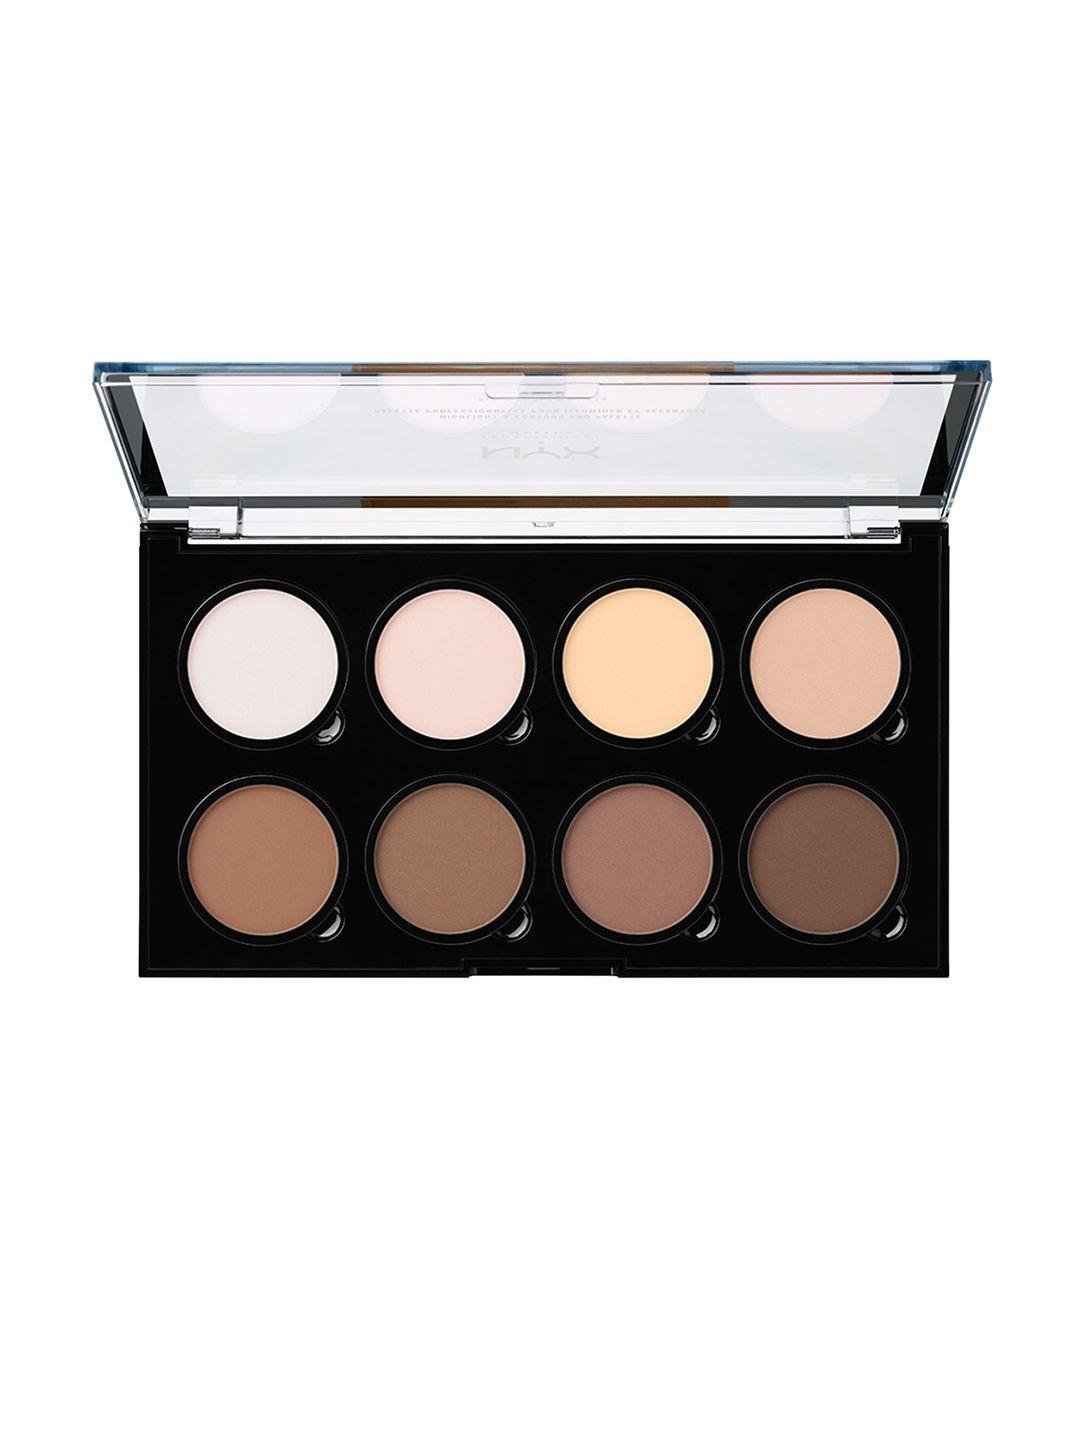 nyx professional makeup highlight & contour pro palette with matte finish - 21.9g